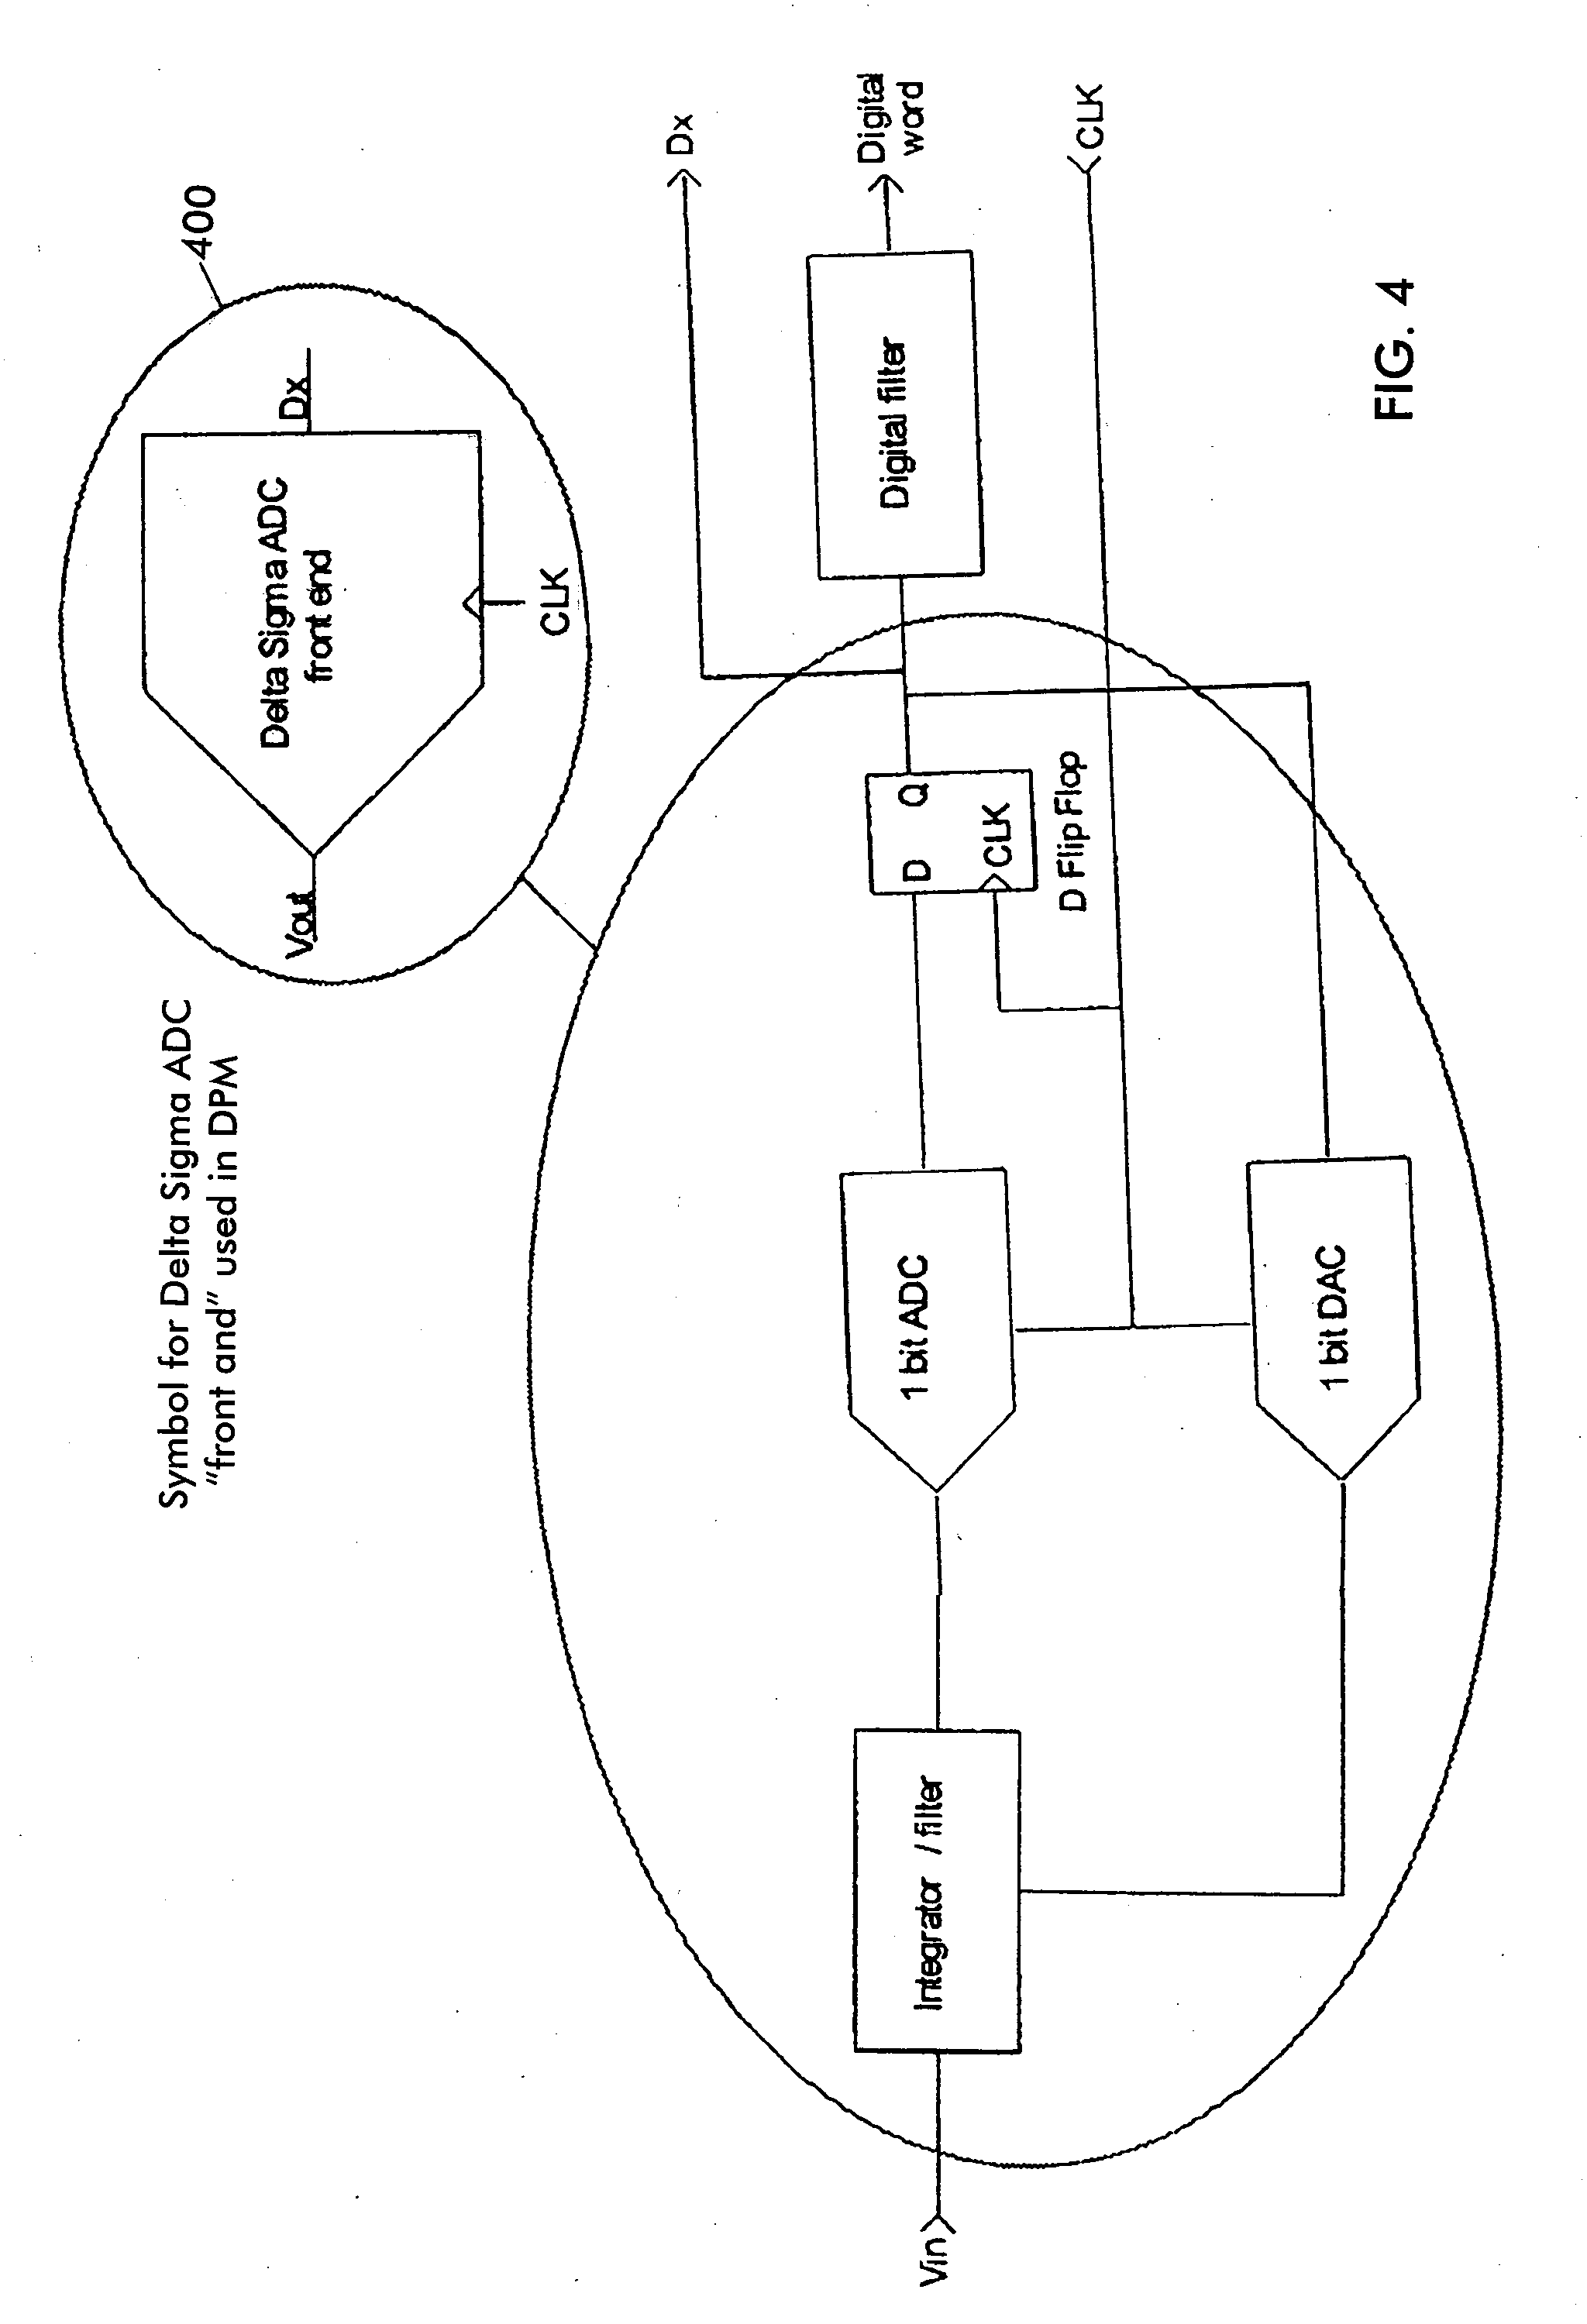 Digital power monitoring circuit and system